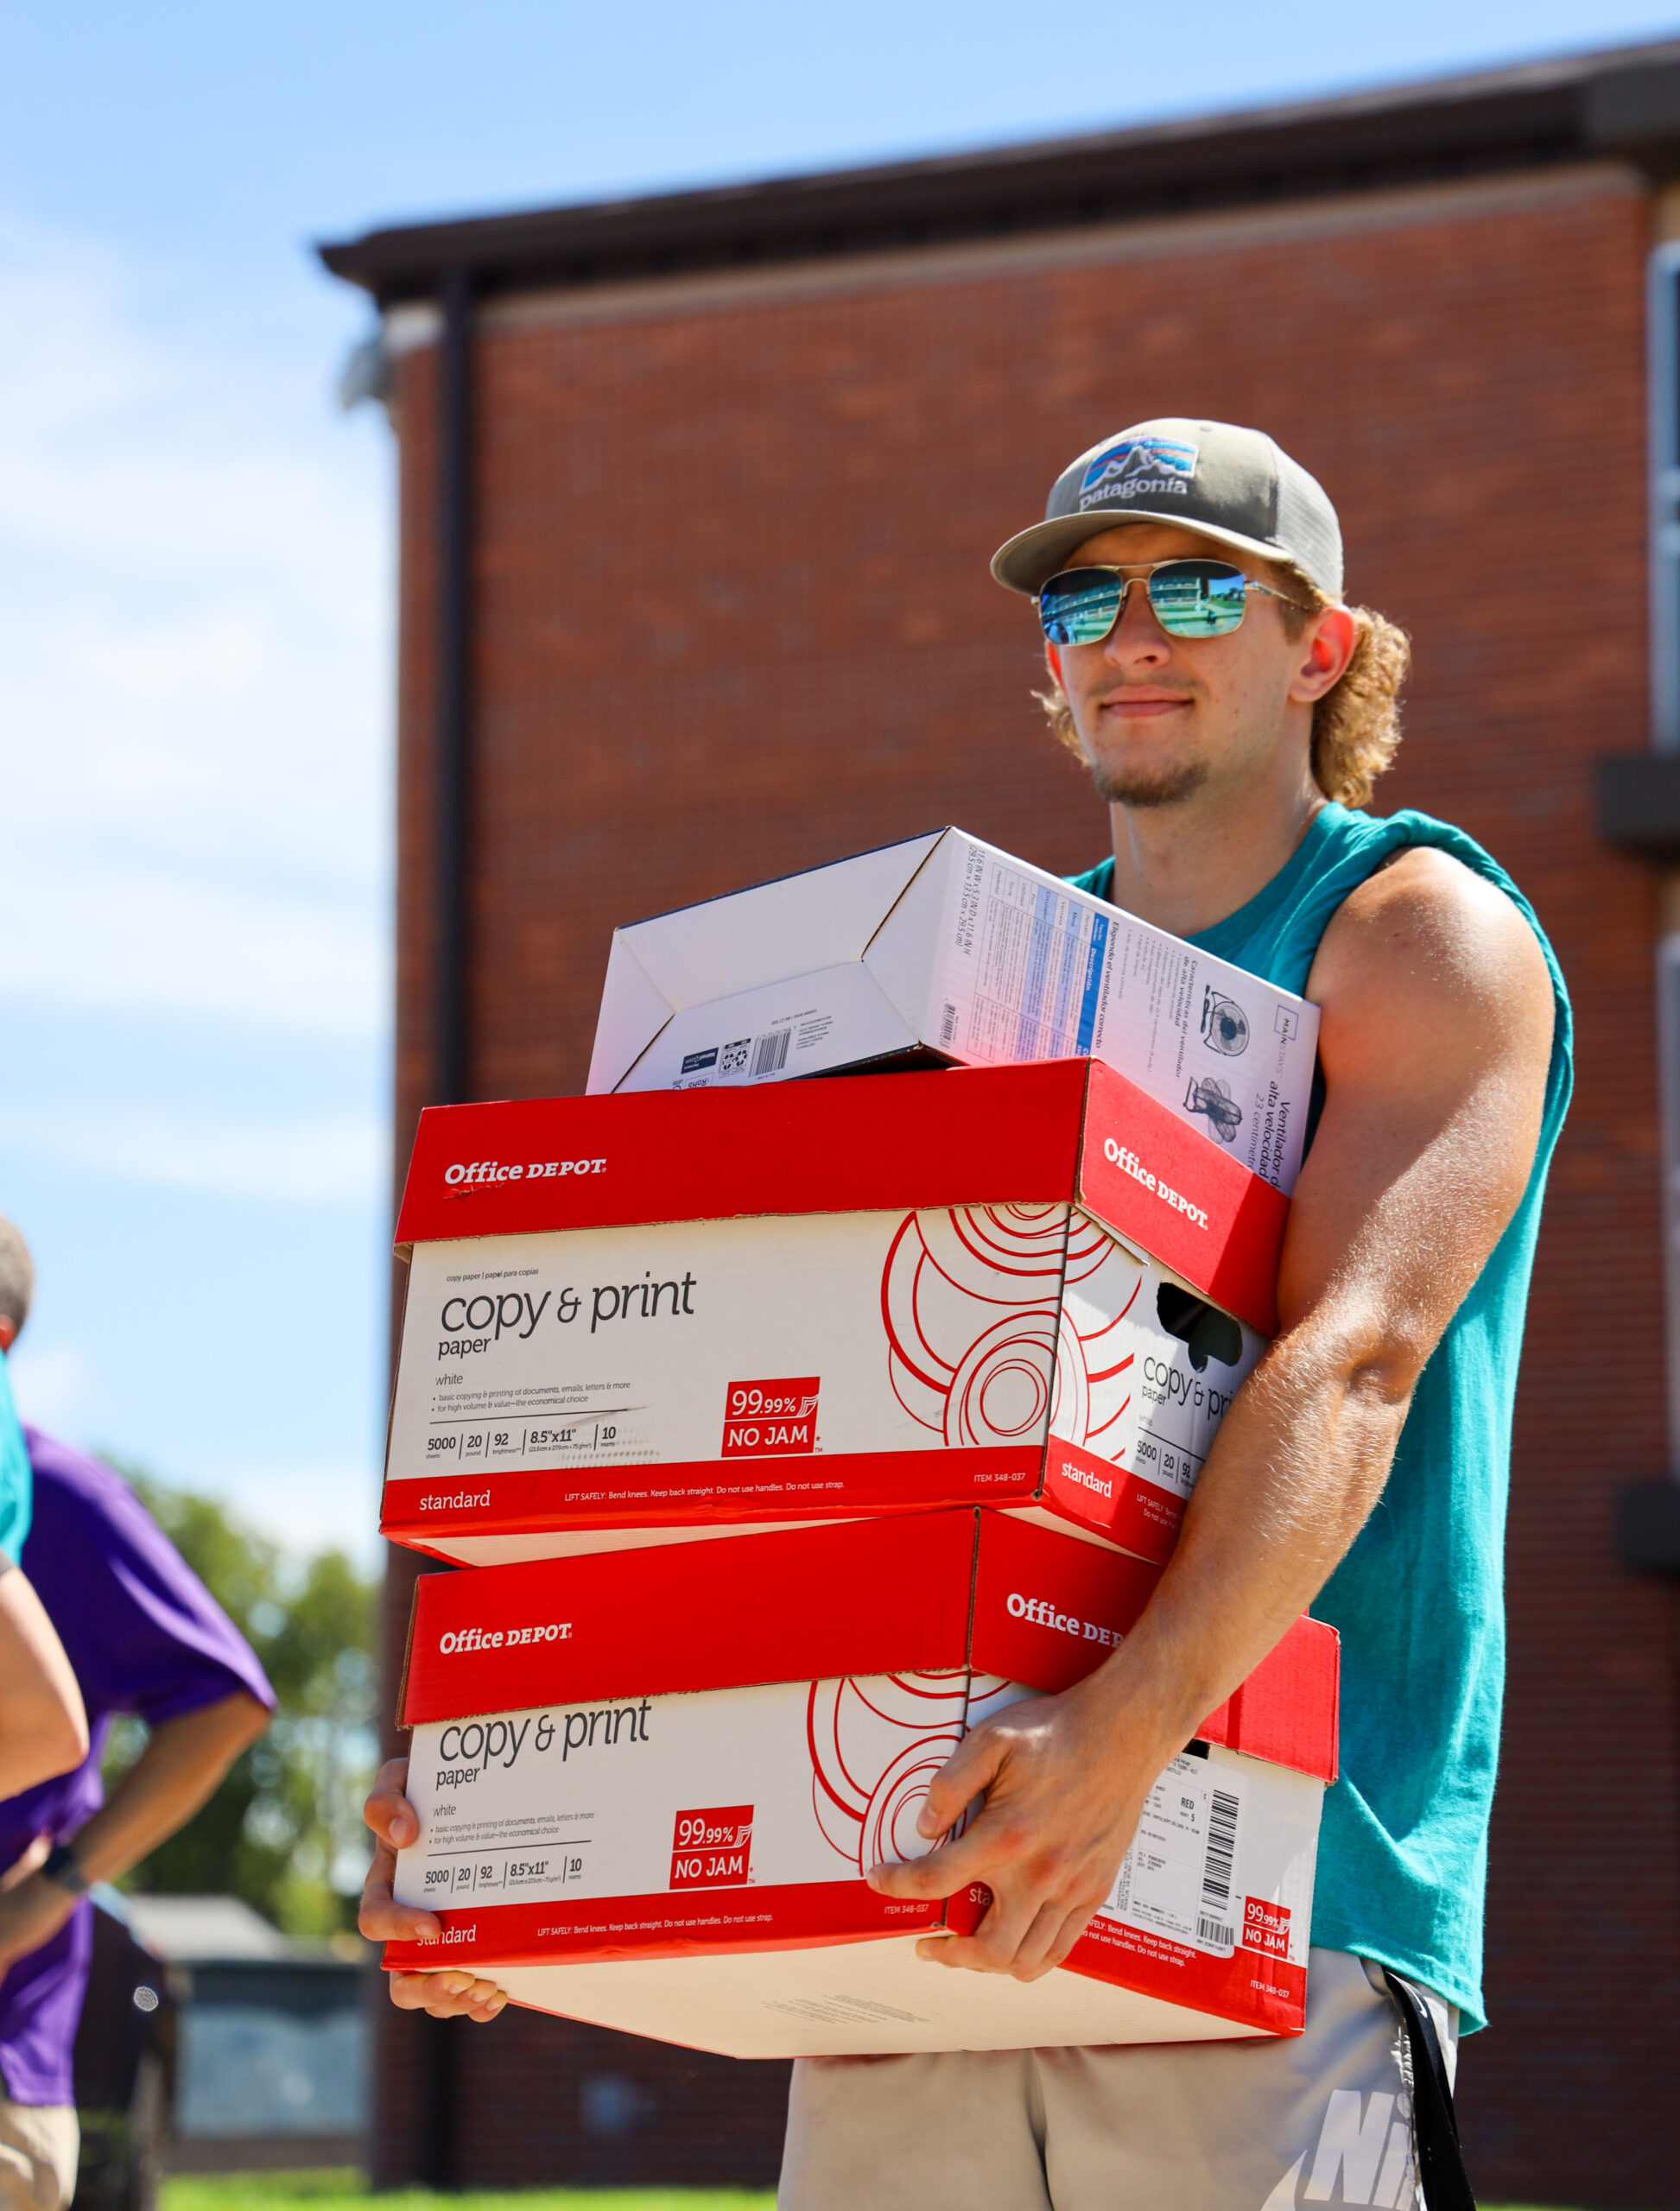 Student carrying large items at move-in